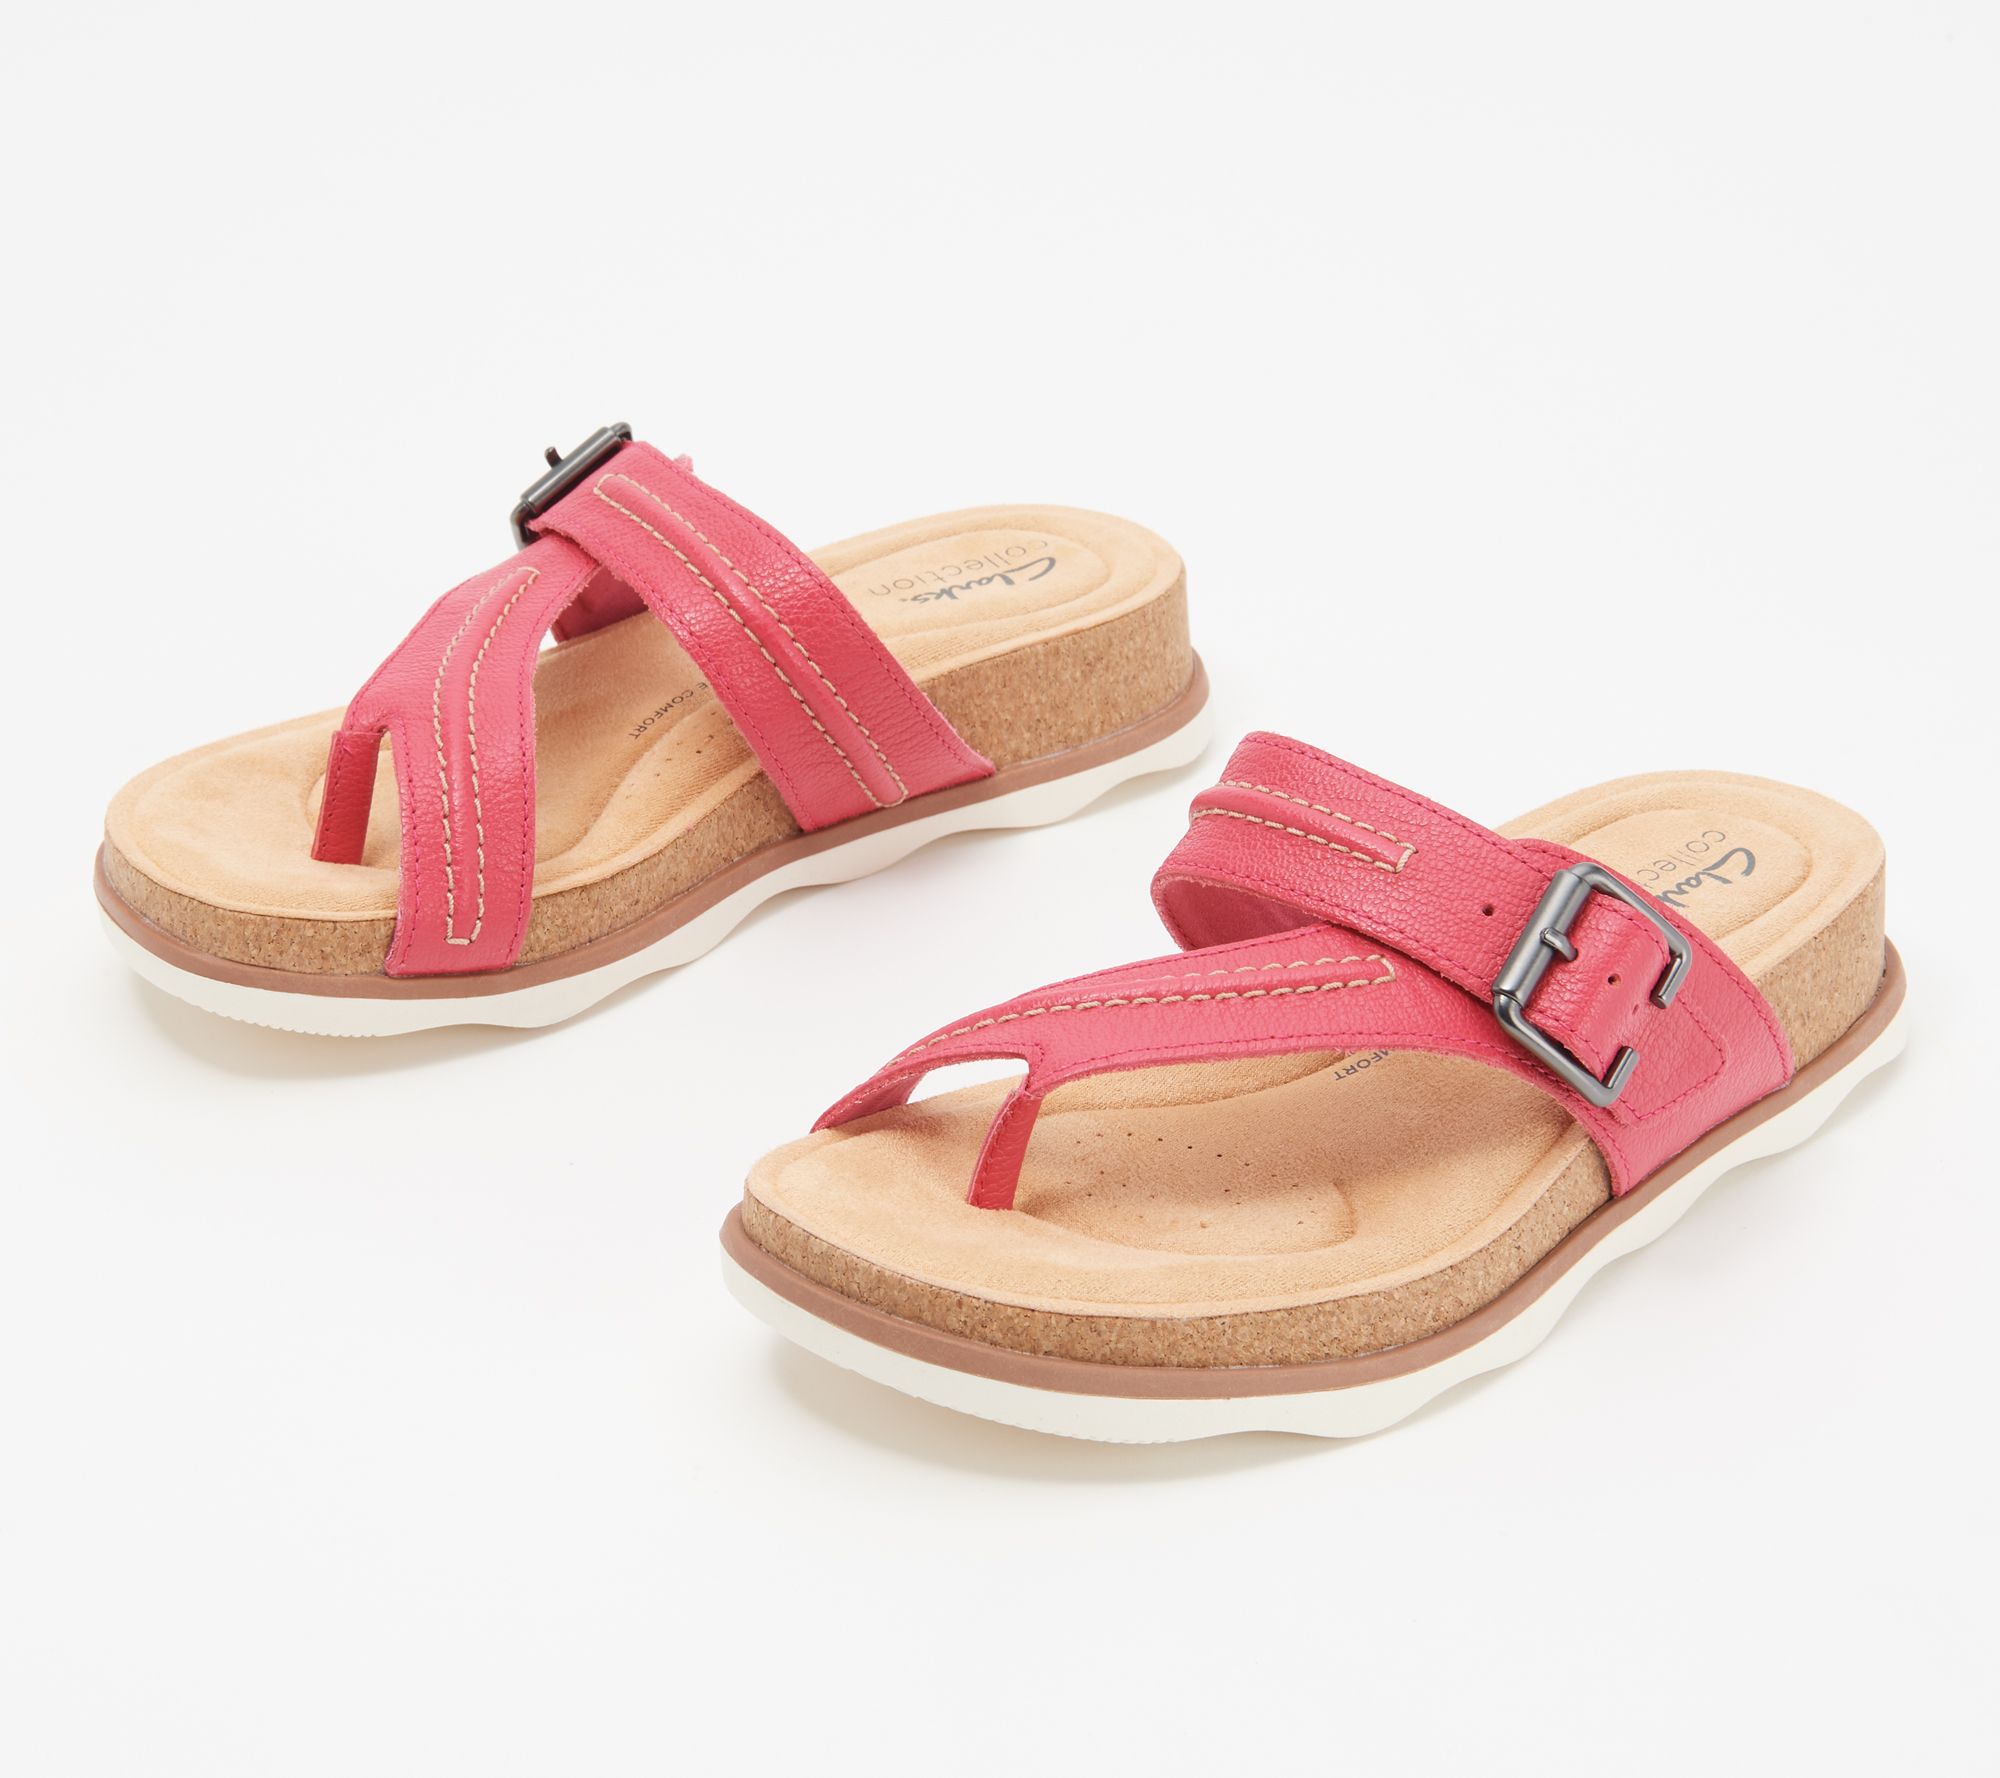 As Is" Collection Buckle Toe-Post Sandals - Brynn Madi - QVC.com